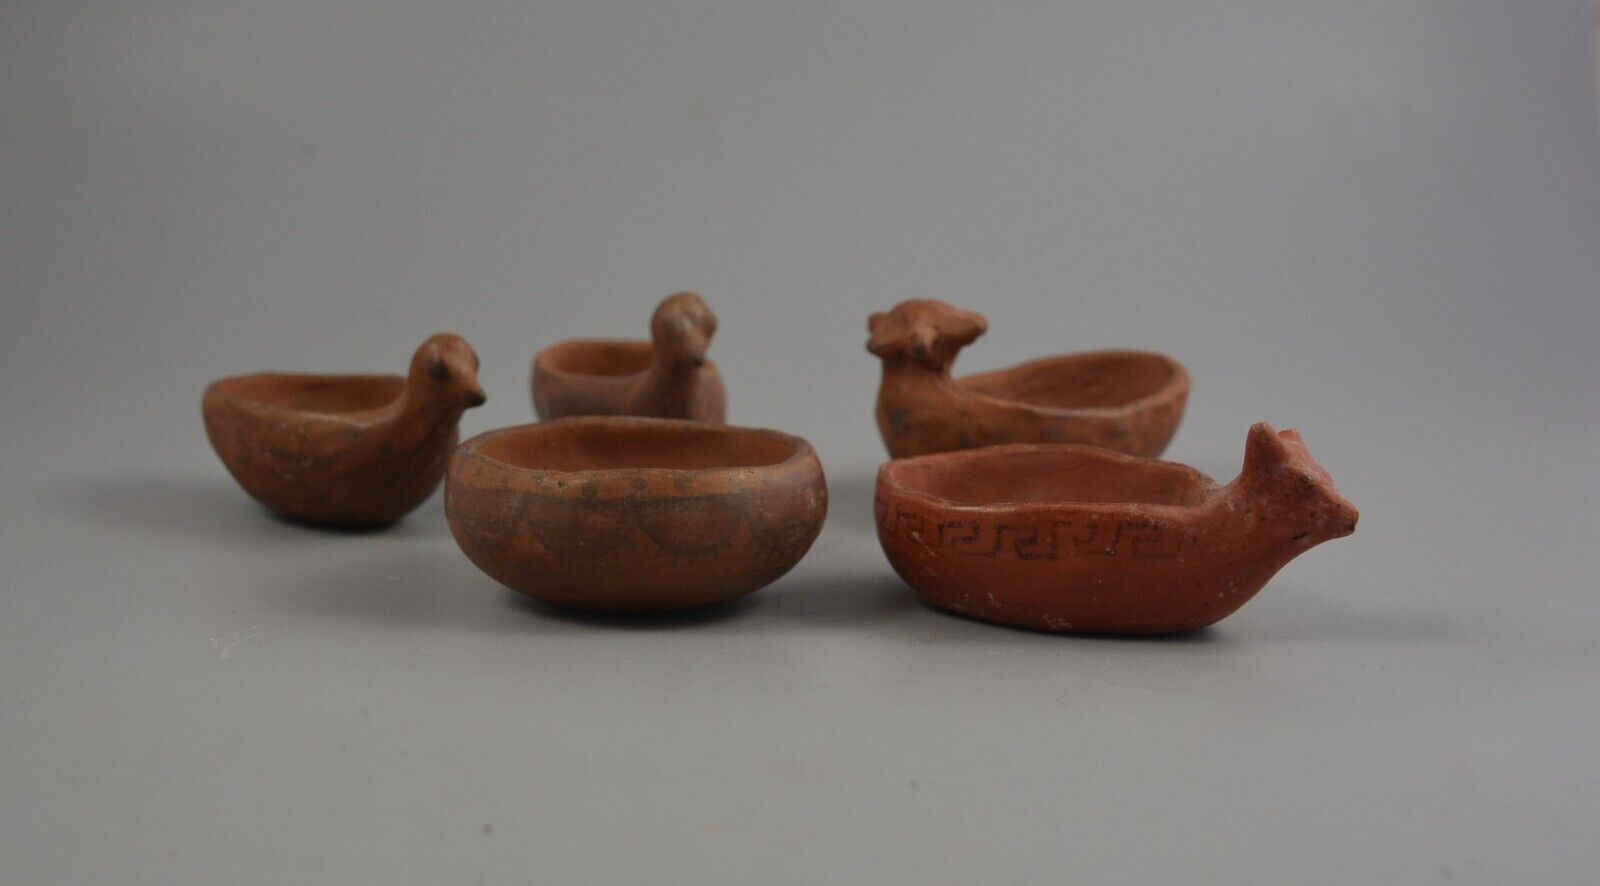 Old Maricopa Pima Indian Small Effigy Pots and Bowl - Collection of 5